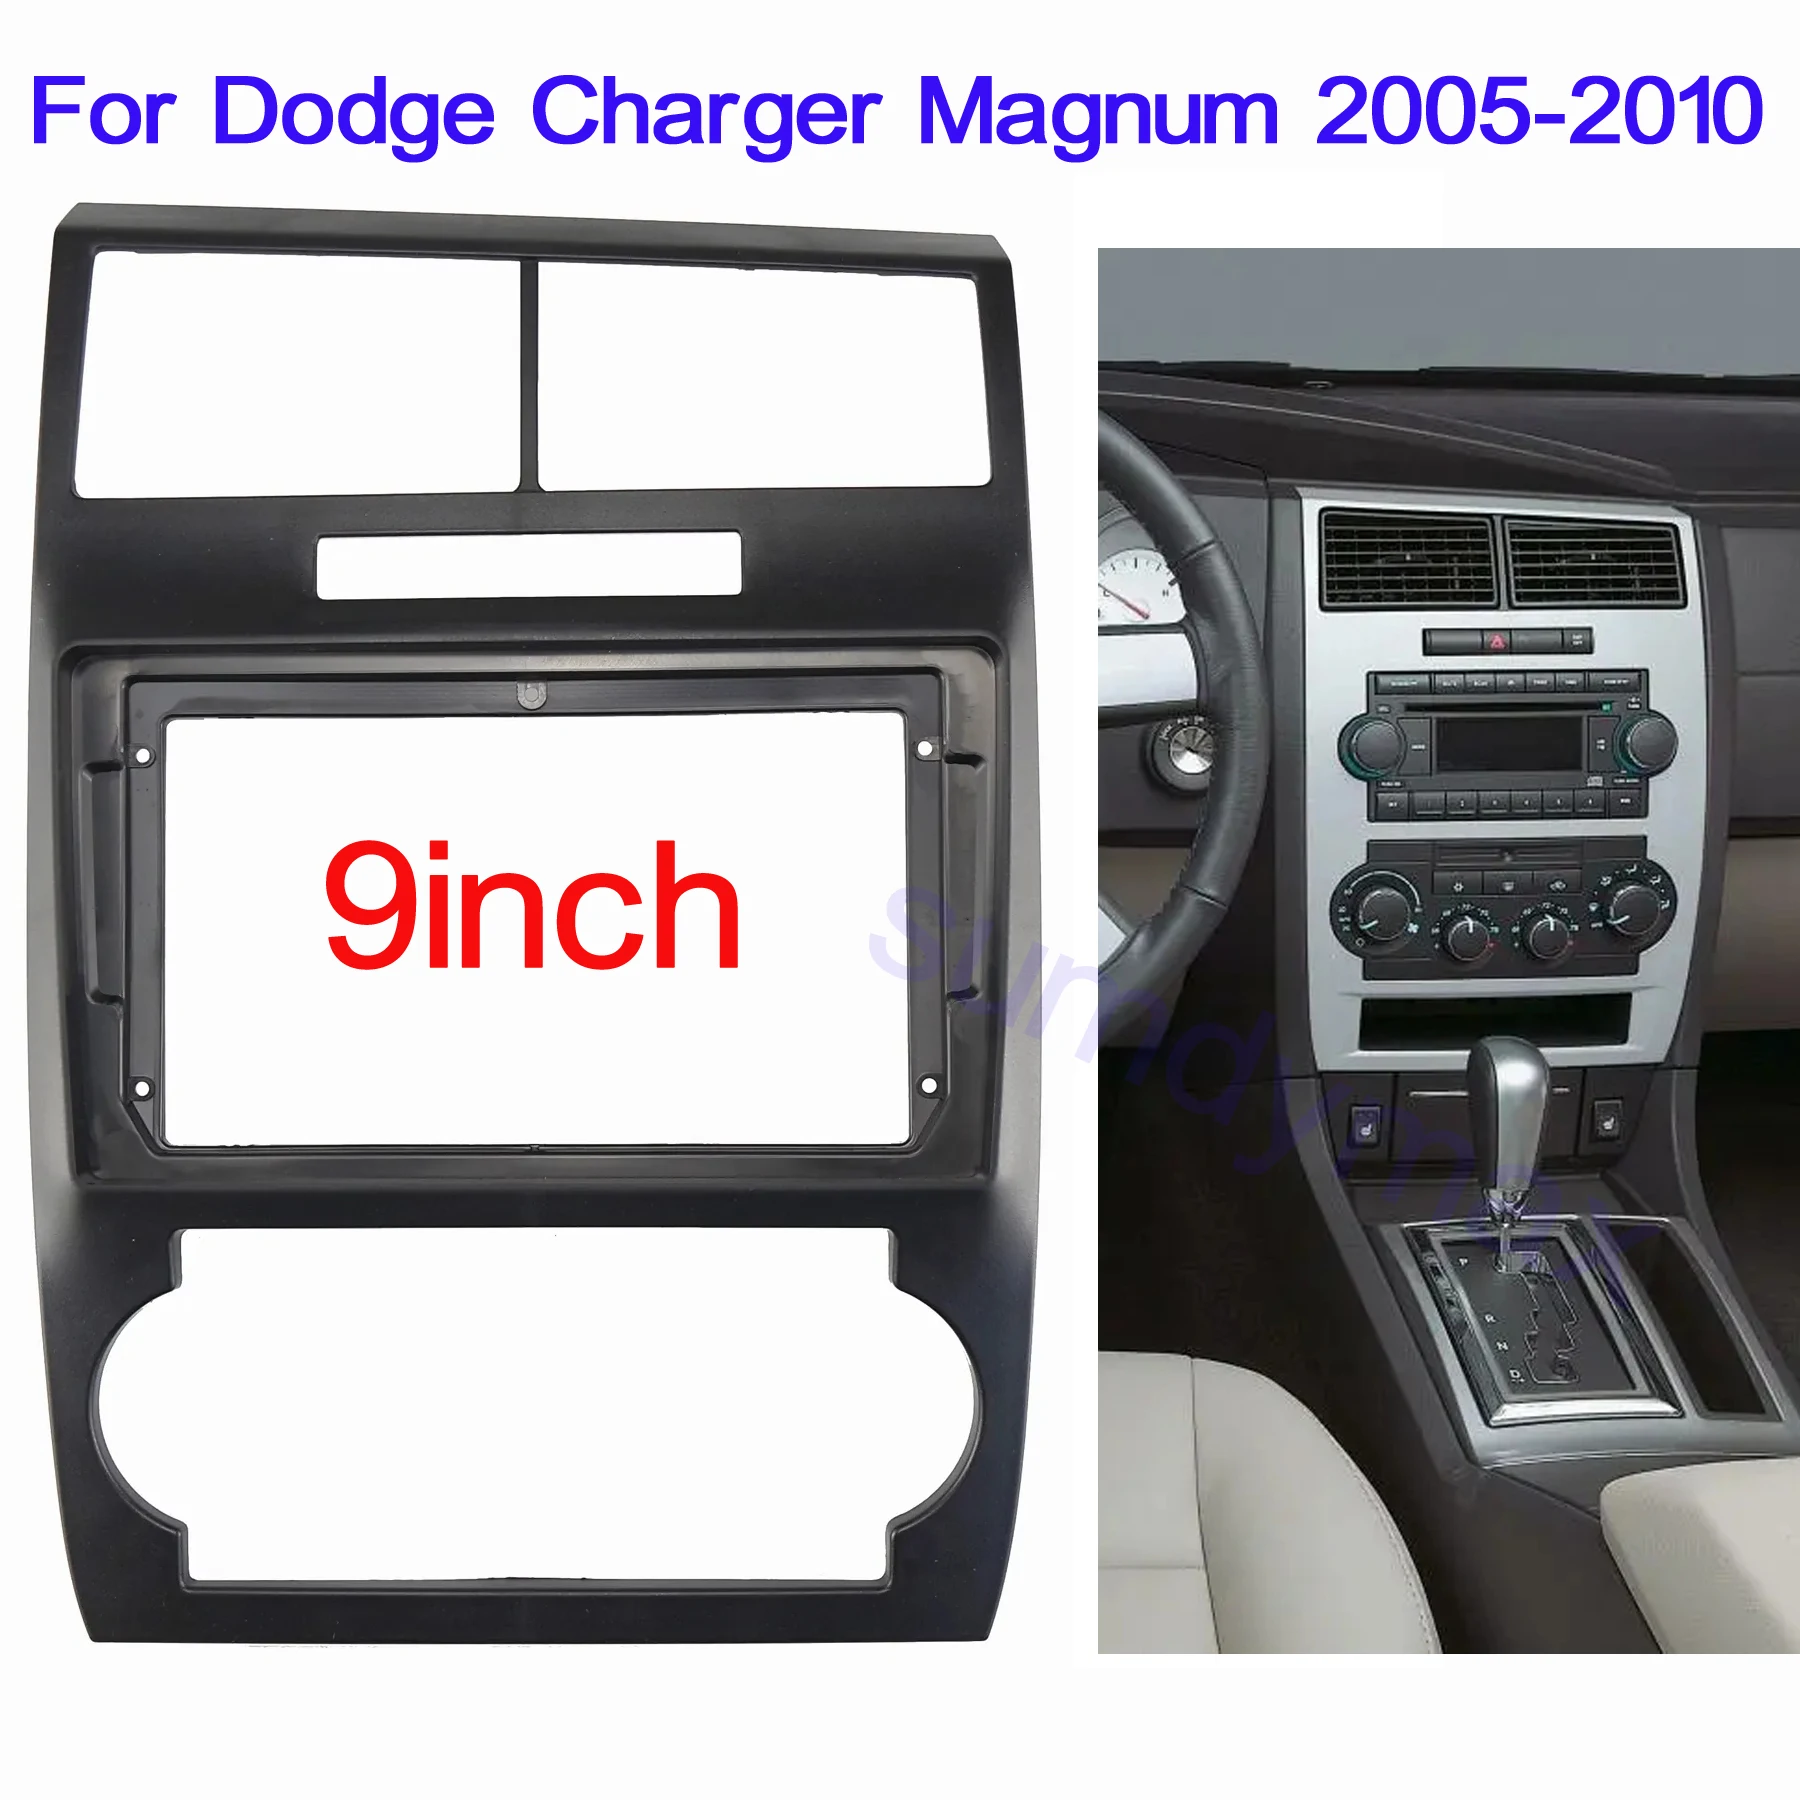 

9inch big screen 2 Din android Car Radio Fascia Frame For Dodge Charger Magnum 2005-2010 car panel Trim Dashboard Panel Kit